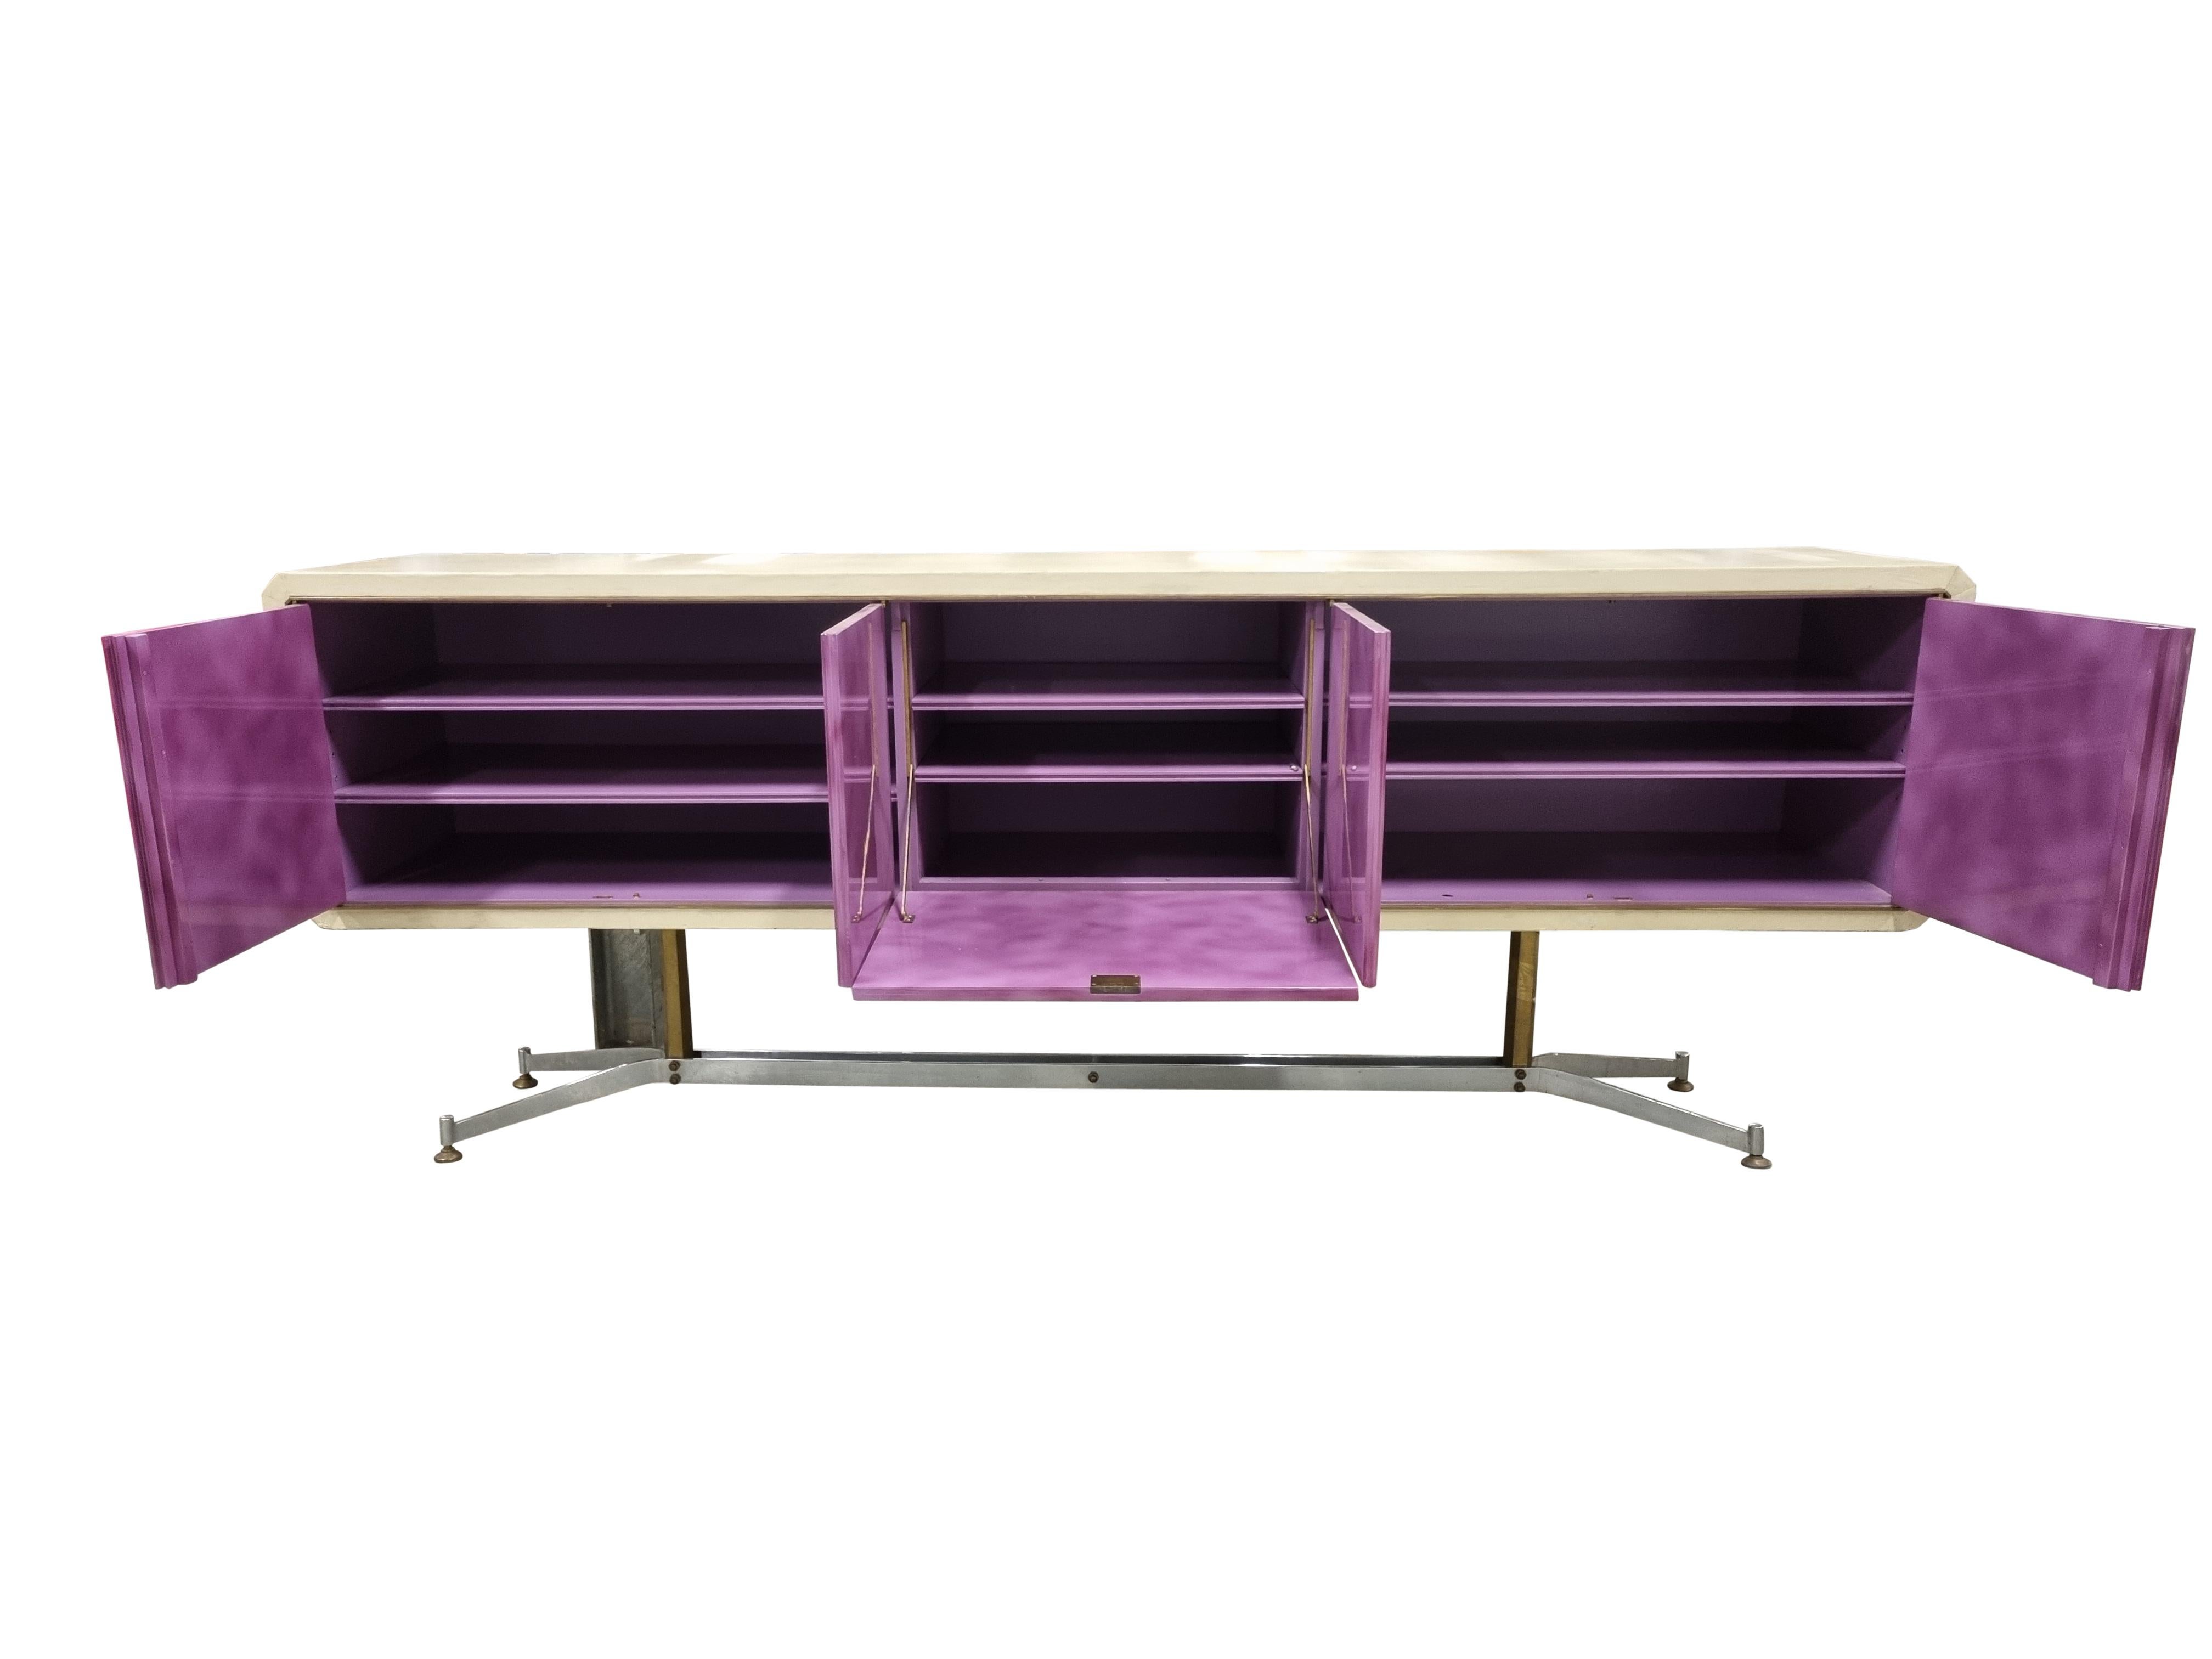 Unique mid-century sideboard designed by Enzo Missoni for a villa in the south of France.

This sideboard has the complete 1960s vibe and is a true eye catcher.

It features a chromed steel base, leather casing and purple lacquered doors.

4